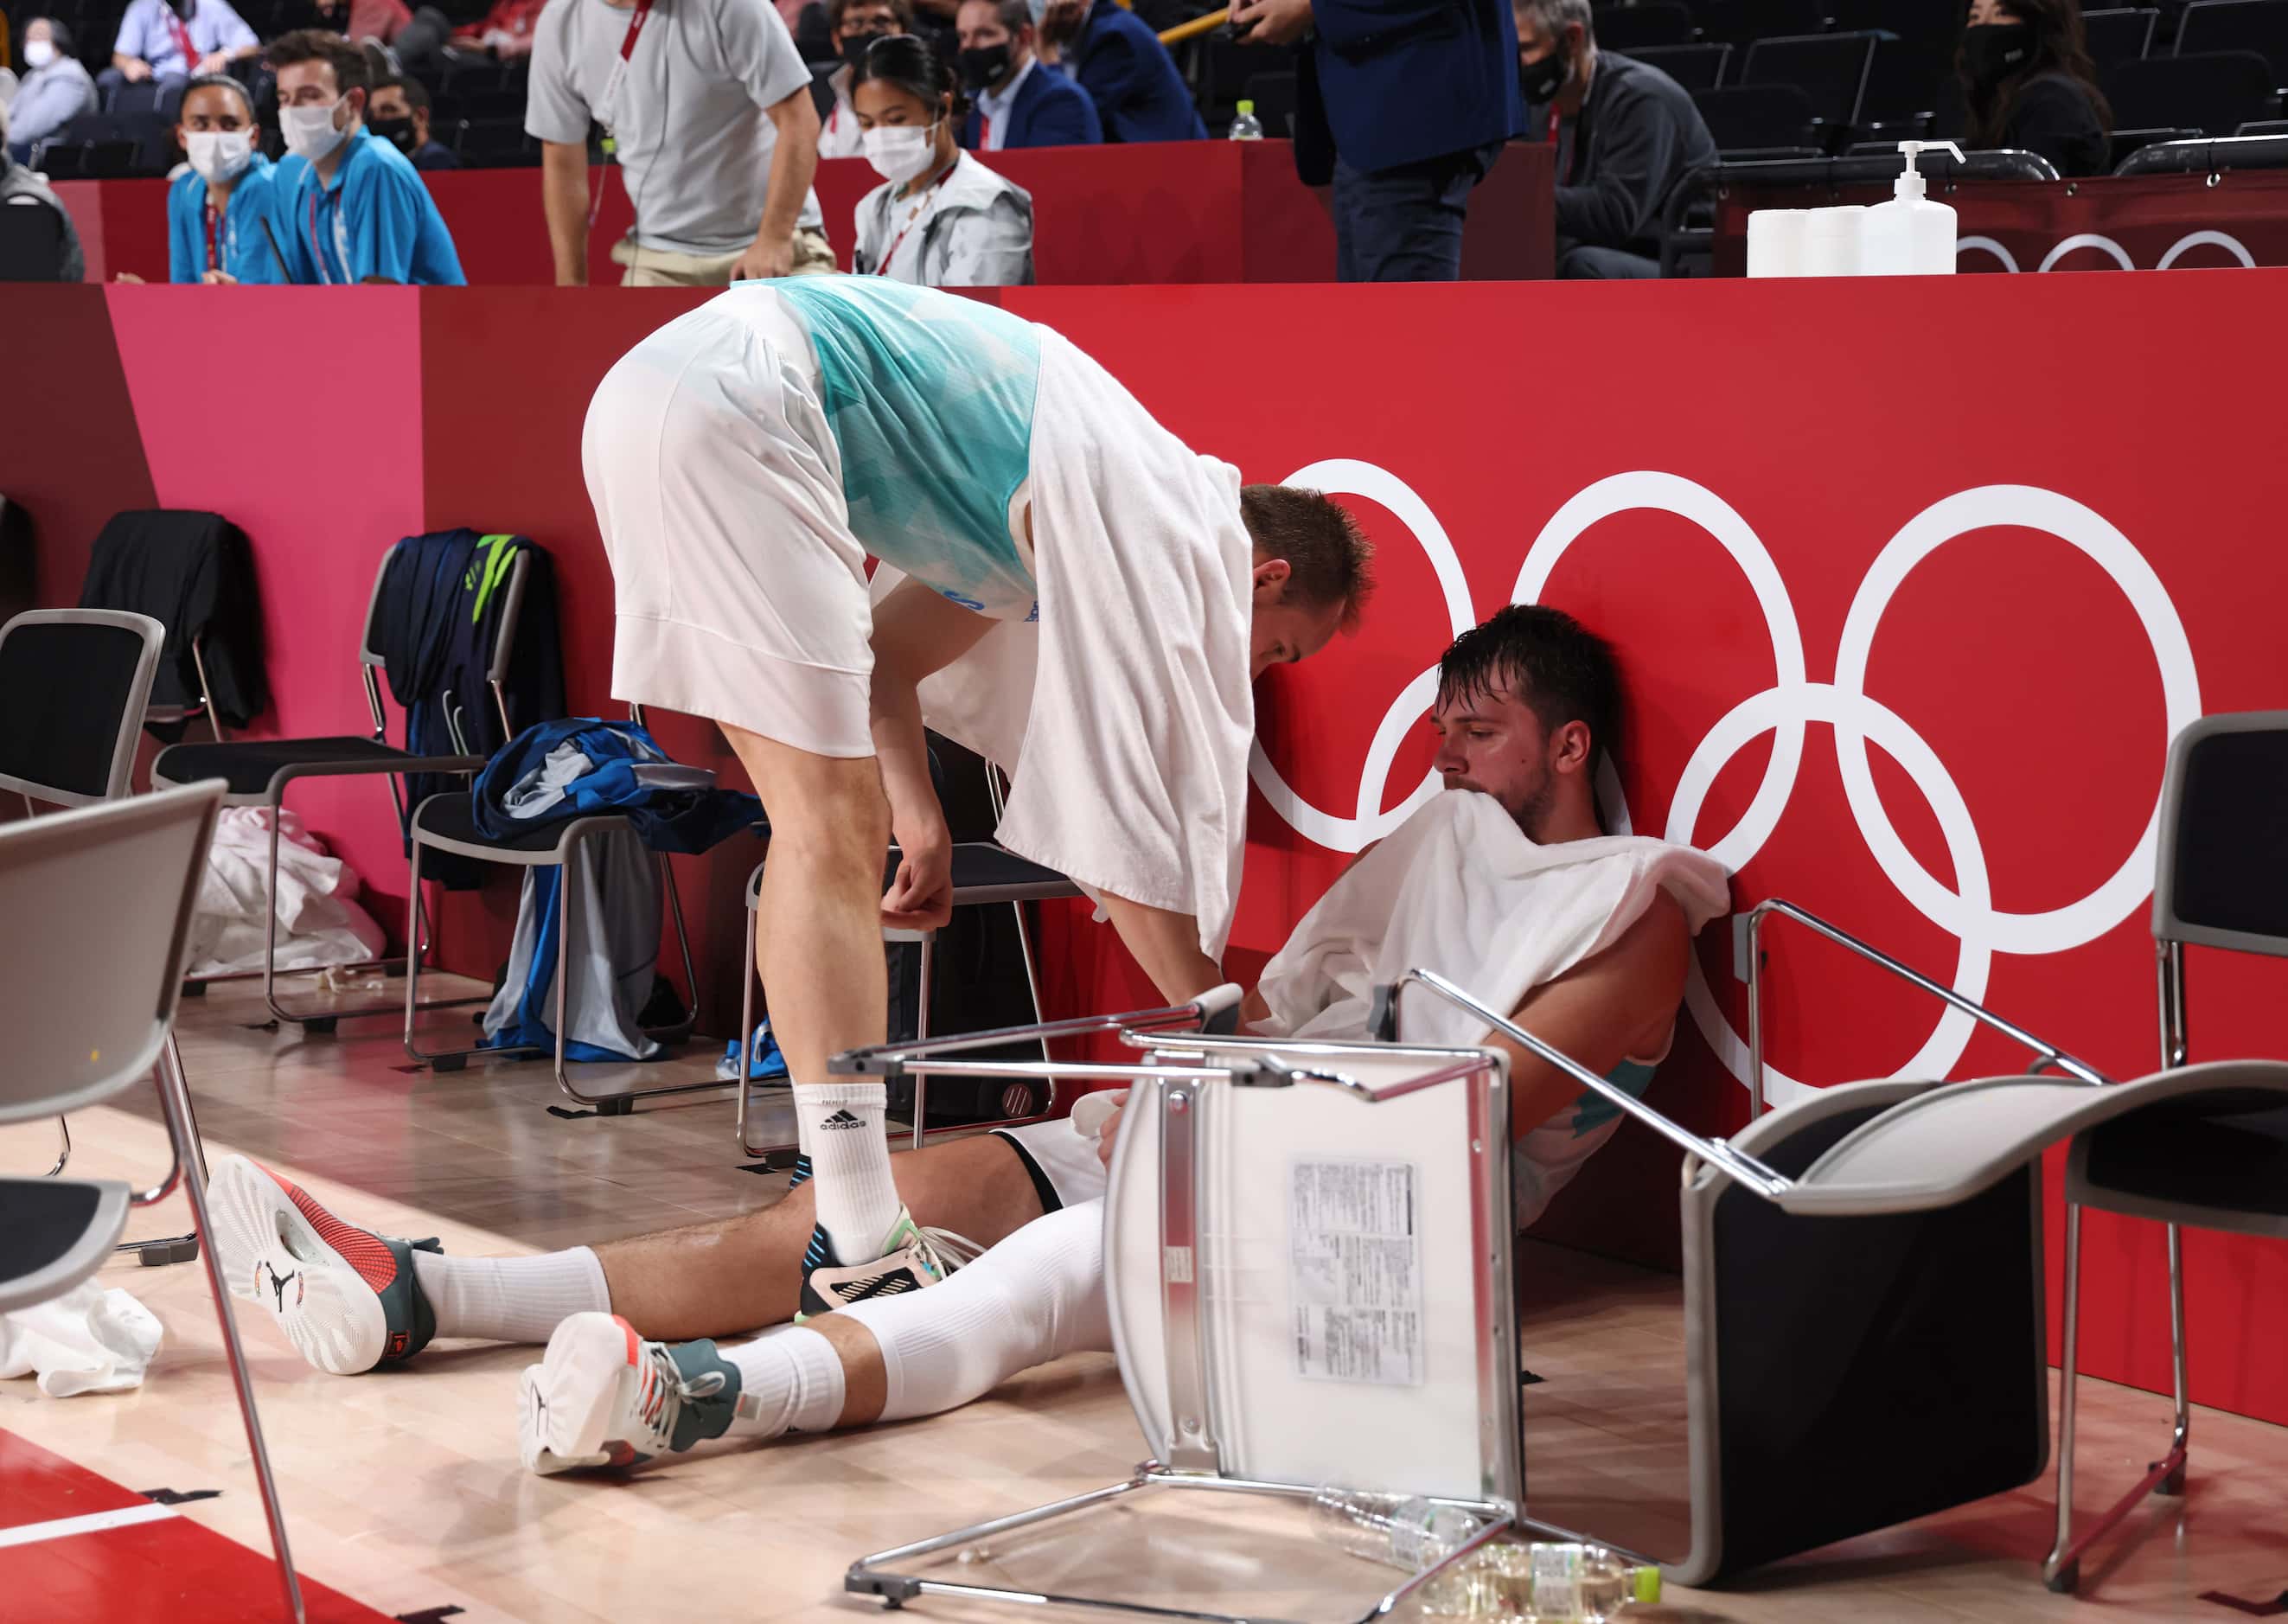 Slovenia’s Luka Doncic (77) sits dejected as teammate Klemen Prepelic (7) talks to him after...